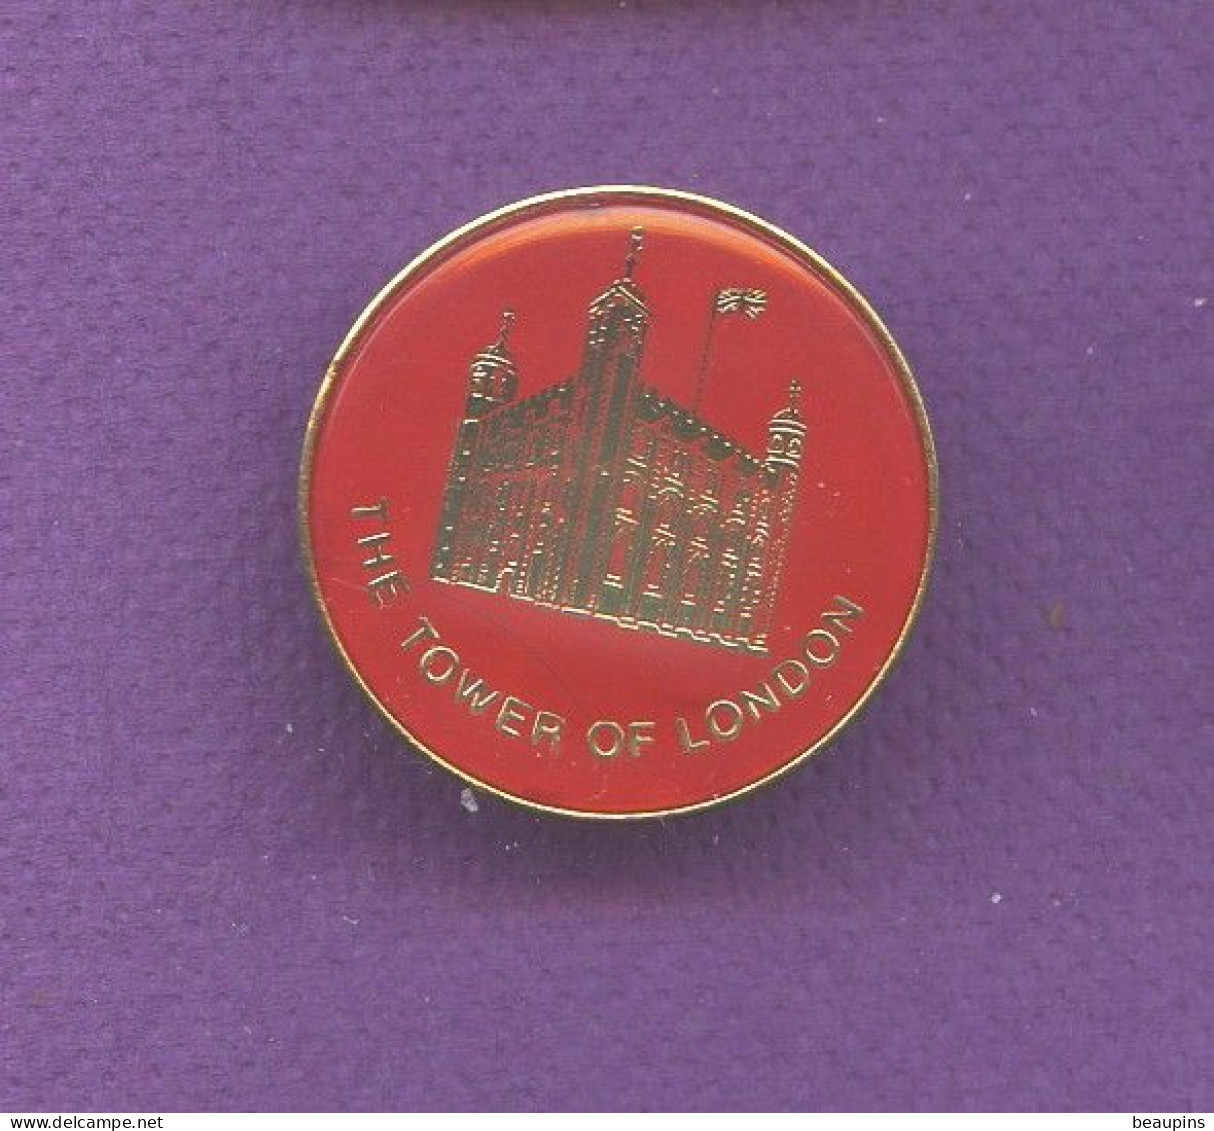 Rare Pins Londres Angleterre  The Tower Of London   T155 - Città